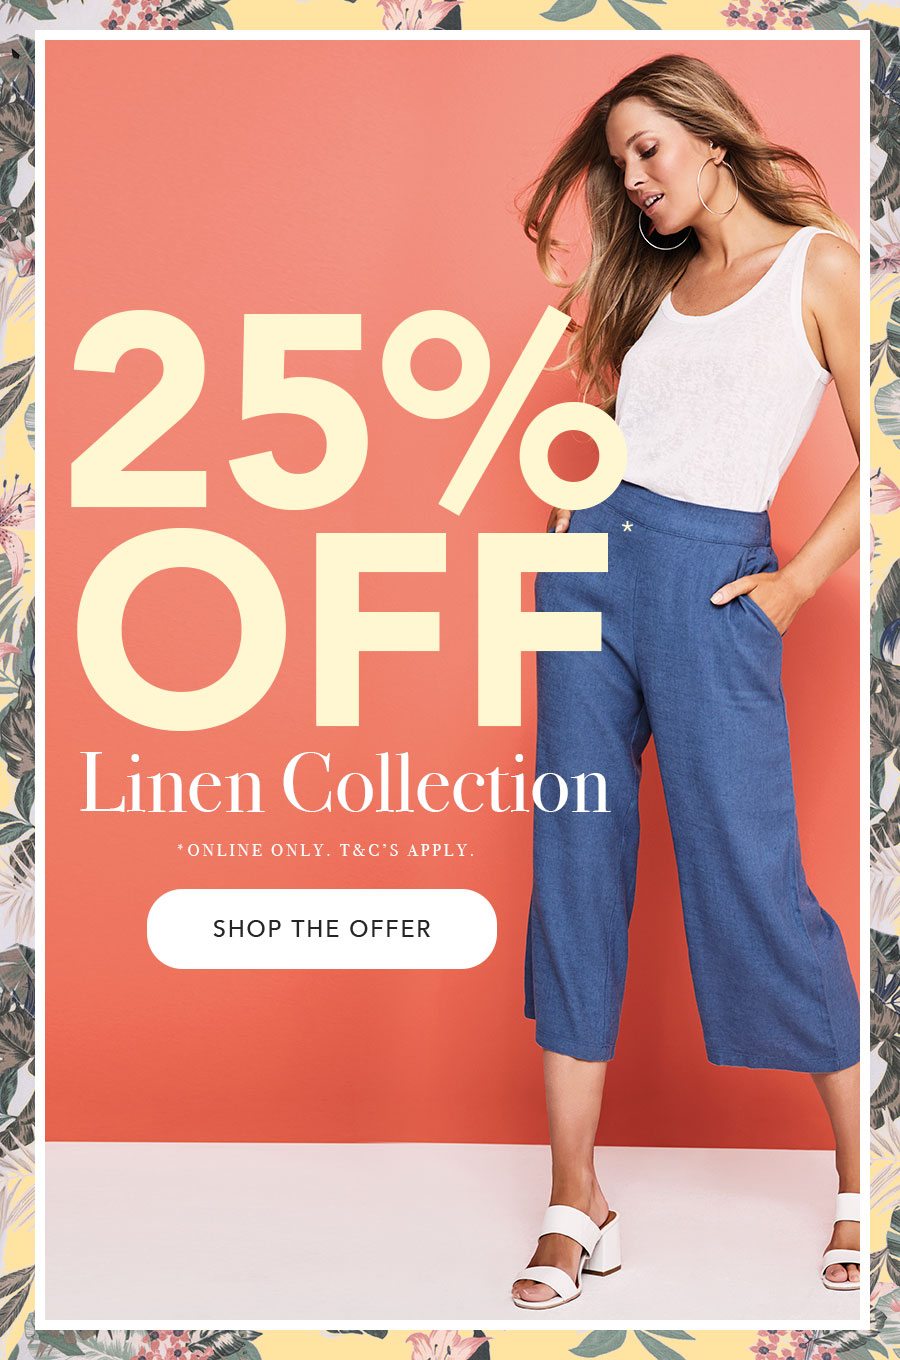 Linen Collection Offer